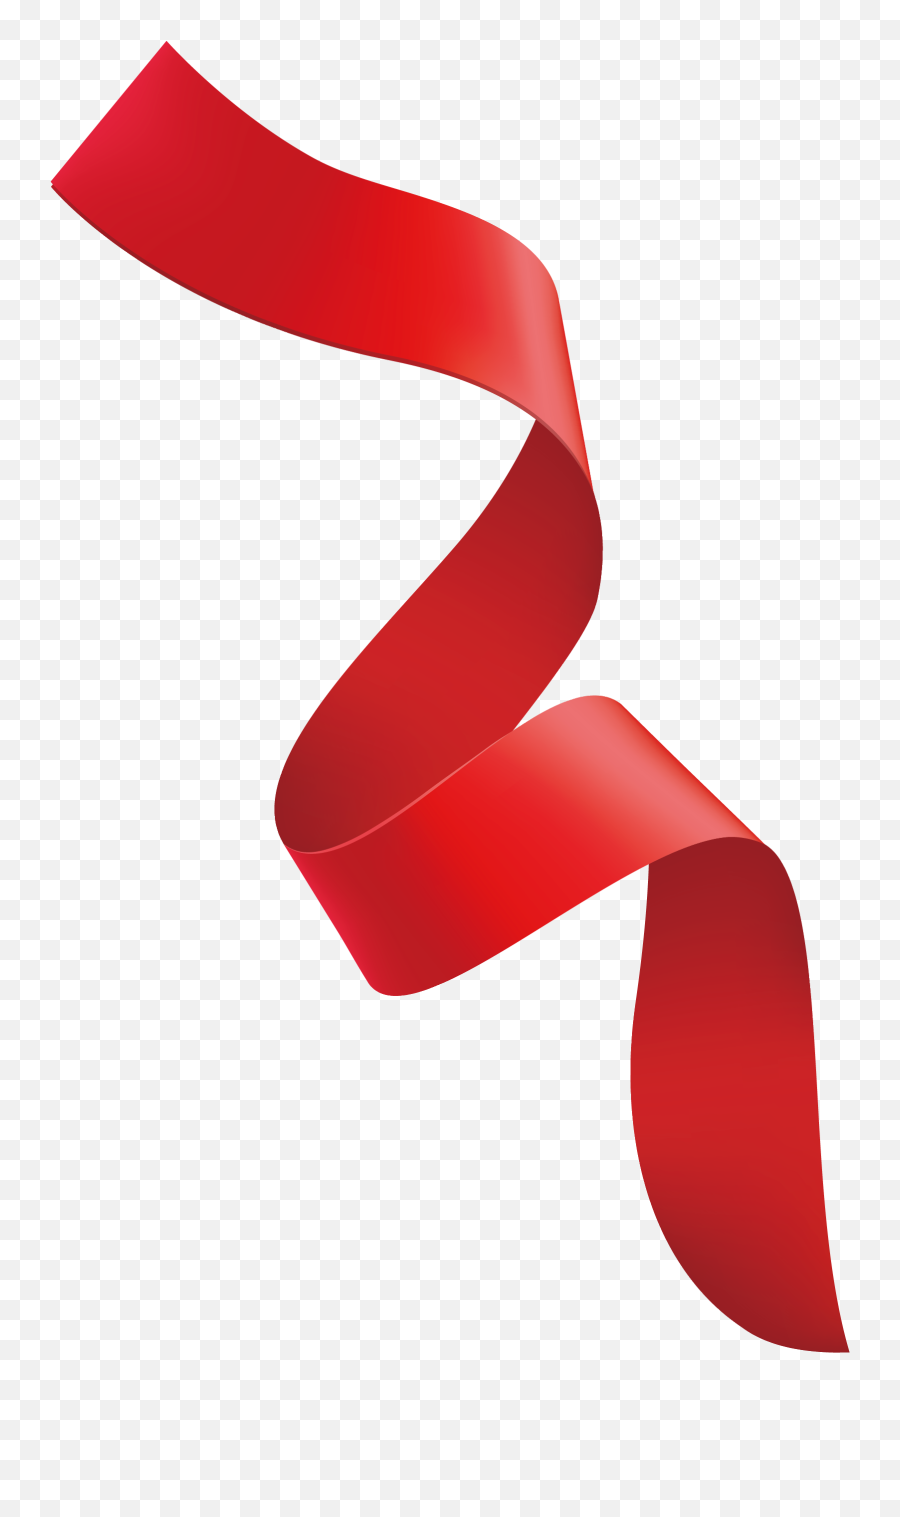 Red Ribbon - Fine Red Curly Ribbons Png Download,Ribbons Png